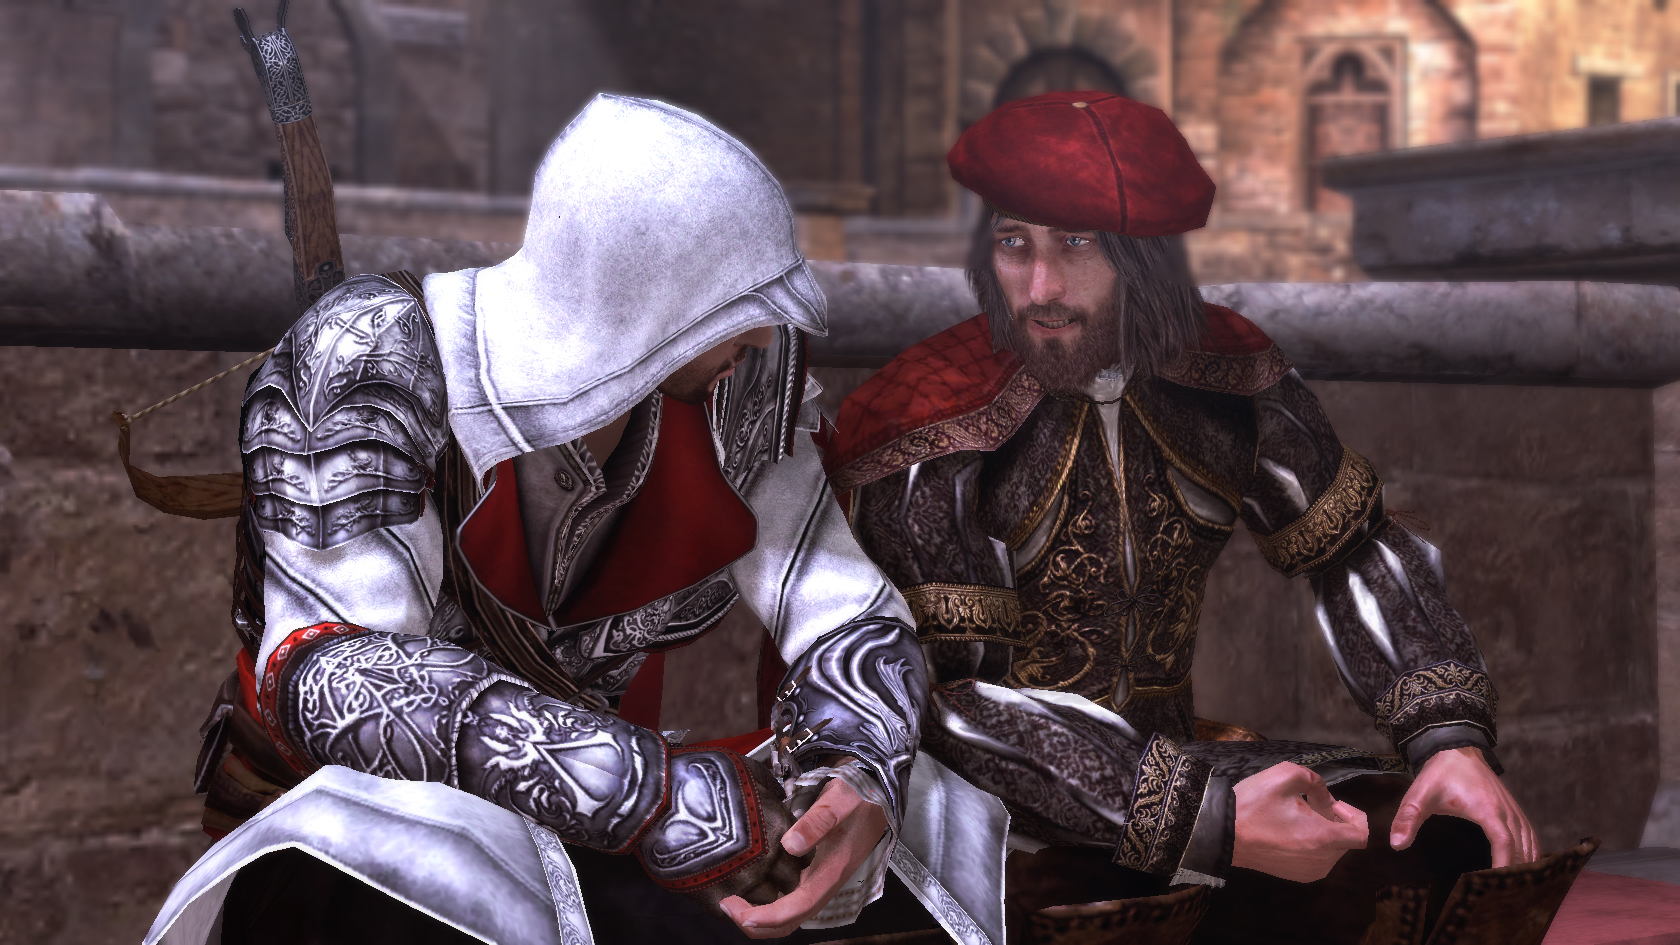 Assassin's Creed II Deluxe Edition · PC 